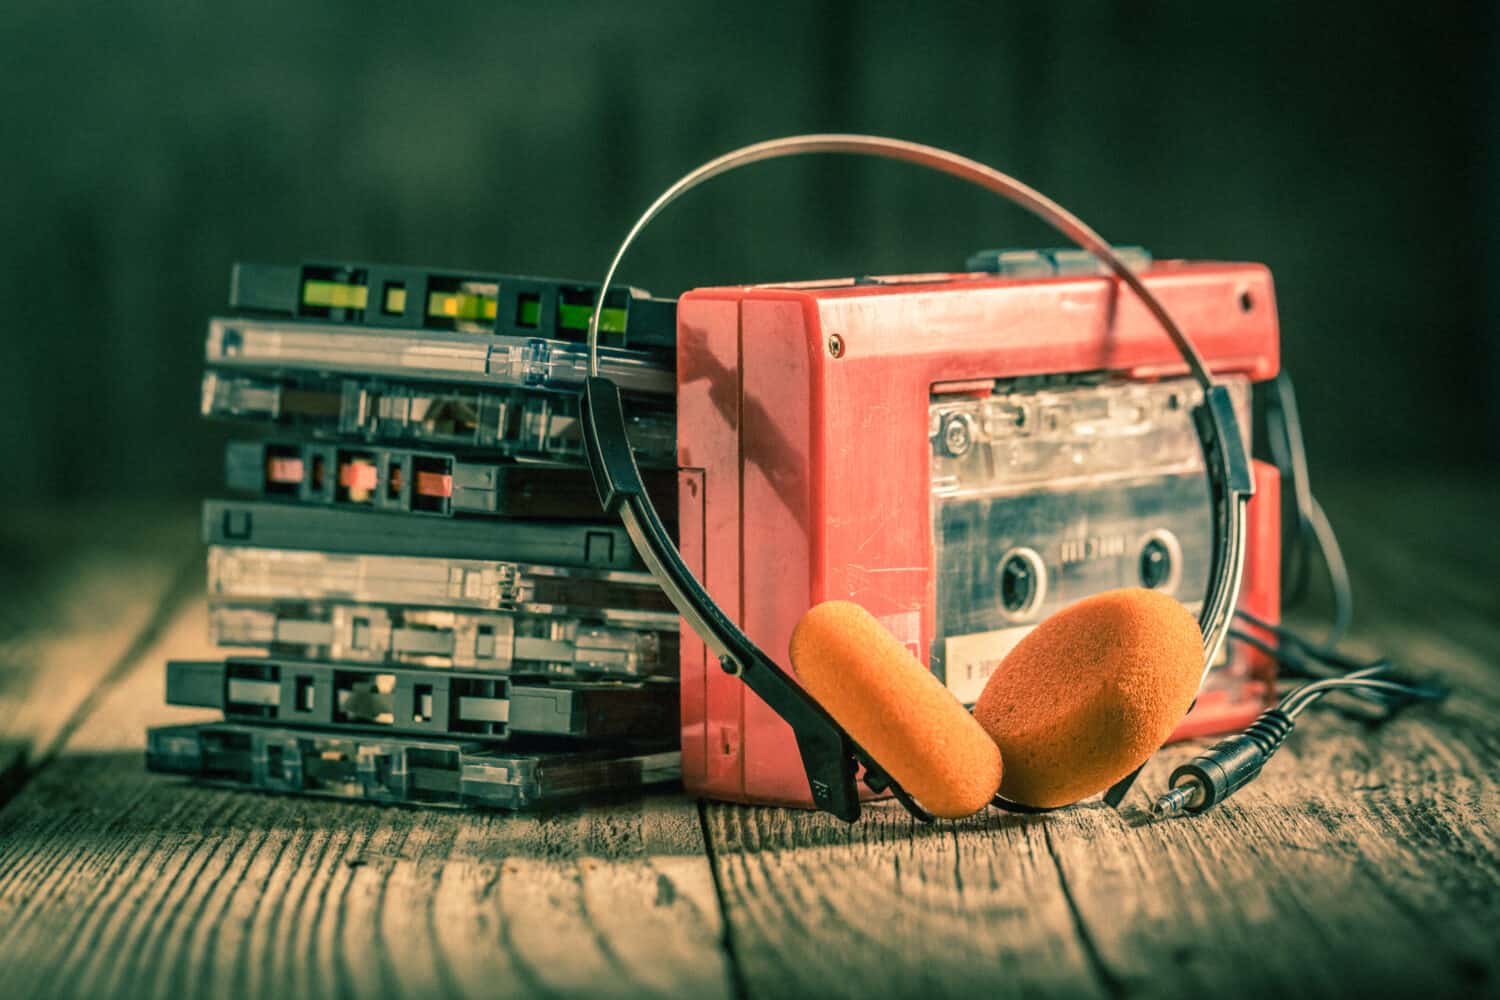 Closeup of cassette tape, red walkman and headphones